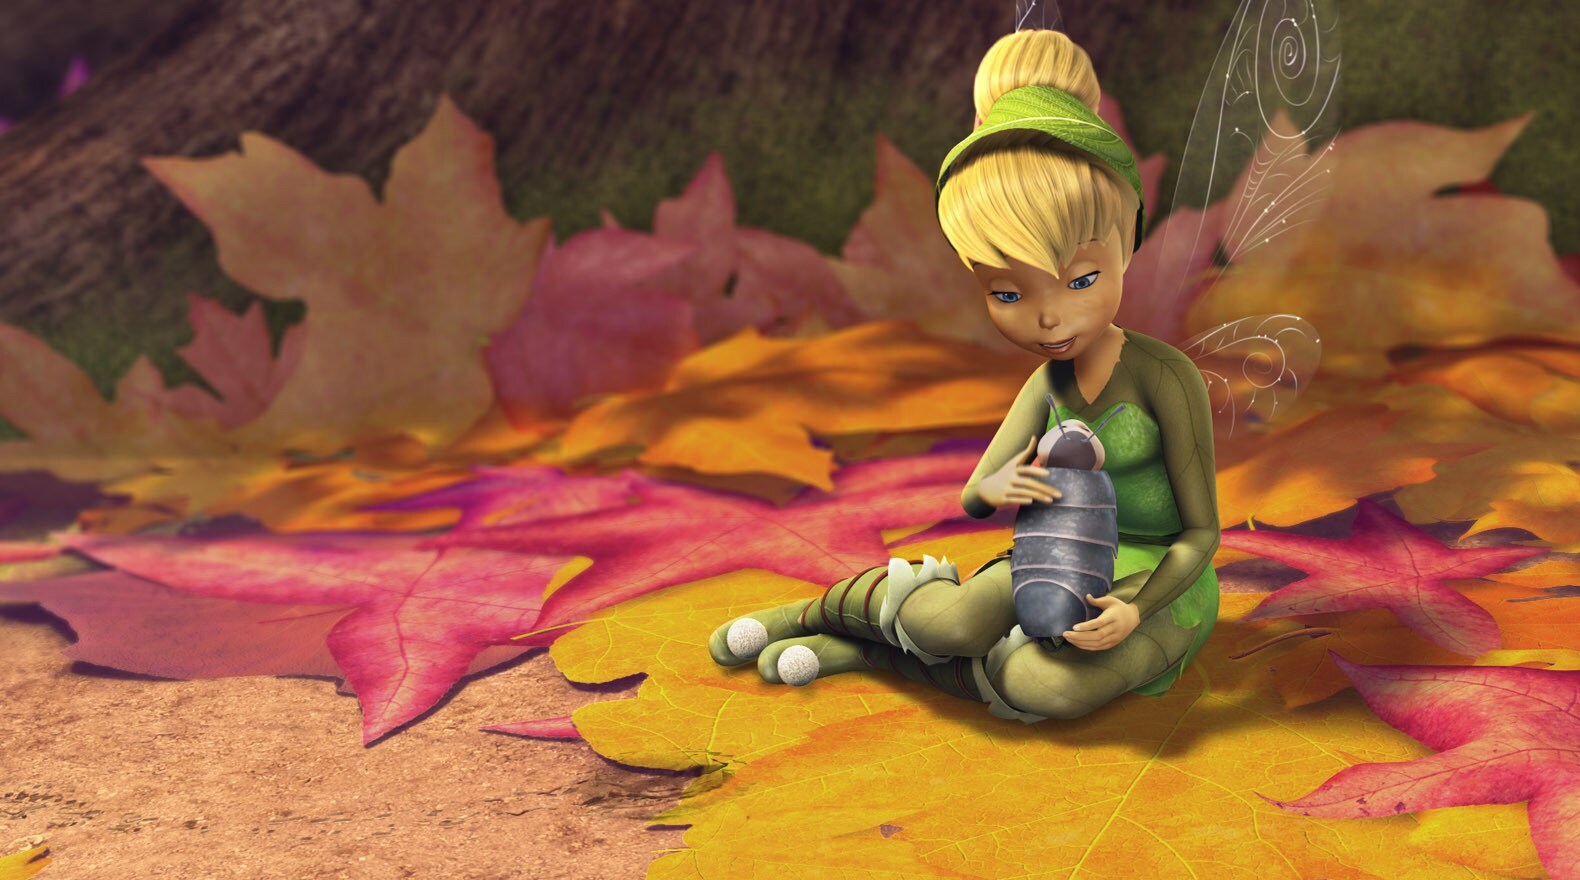 Tinker Bell makes some new friends who help boost her spirits.